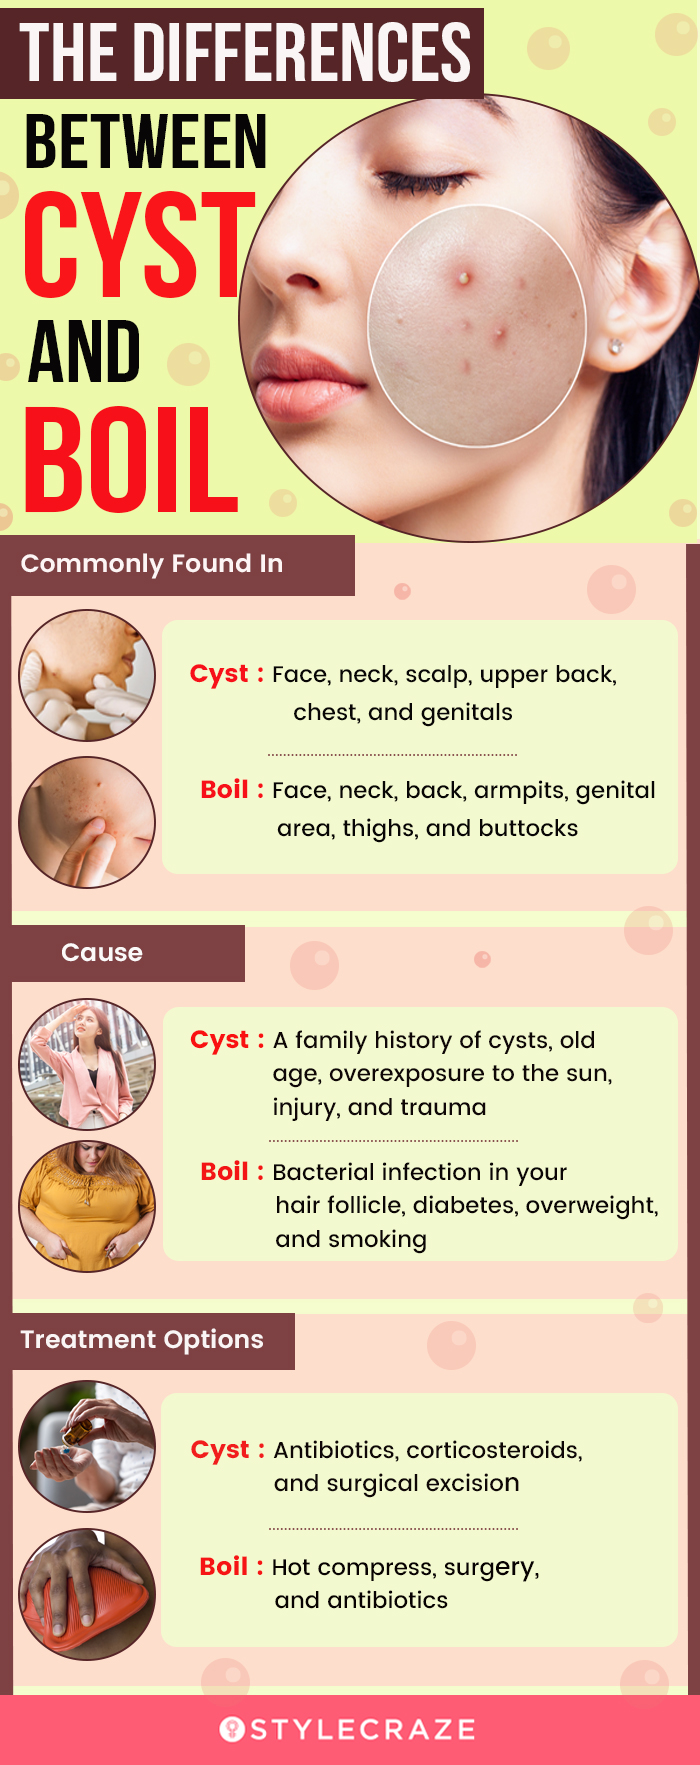 Cyst Vs. Boil: Difference, Identification, And When To See A Doctor